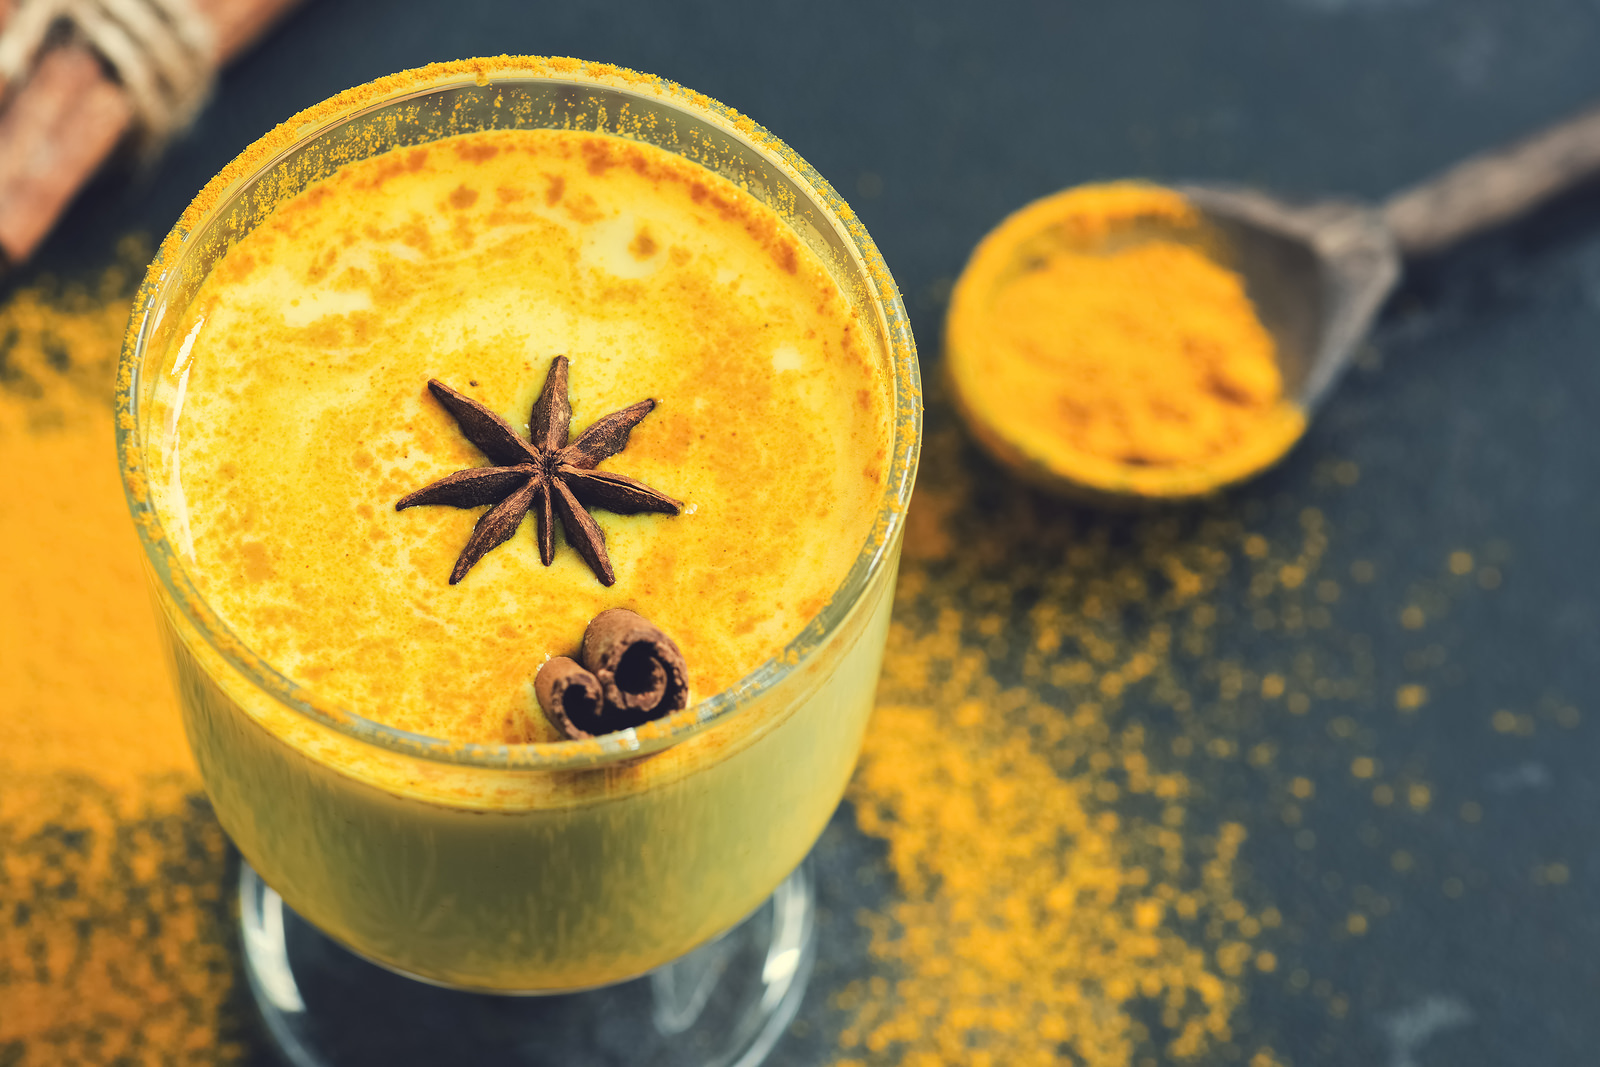 Can Turmeric Relieve Your Aches and Pains? | The People's Pharmacy